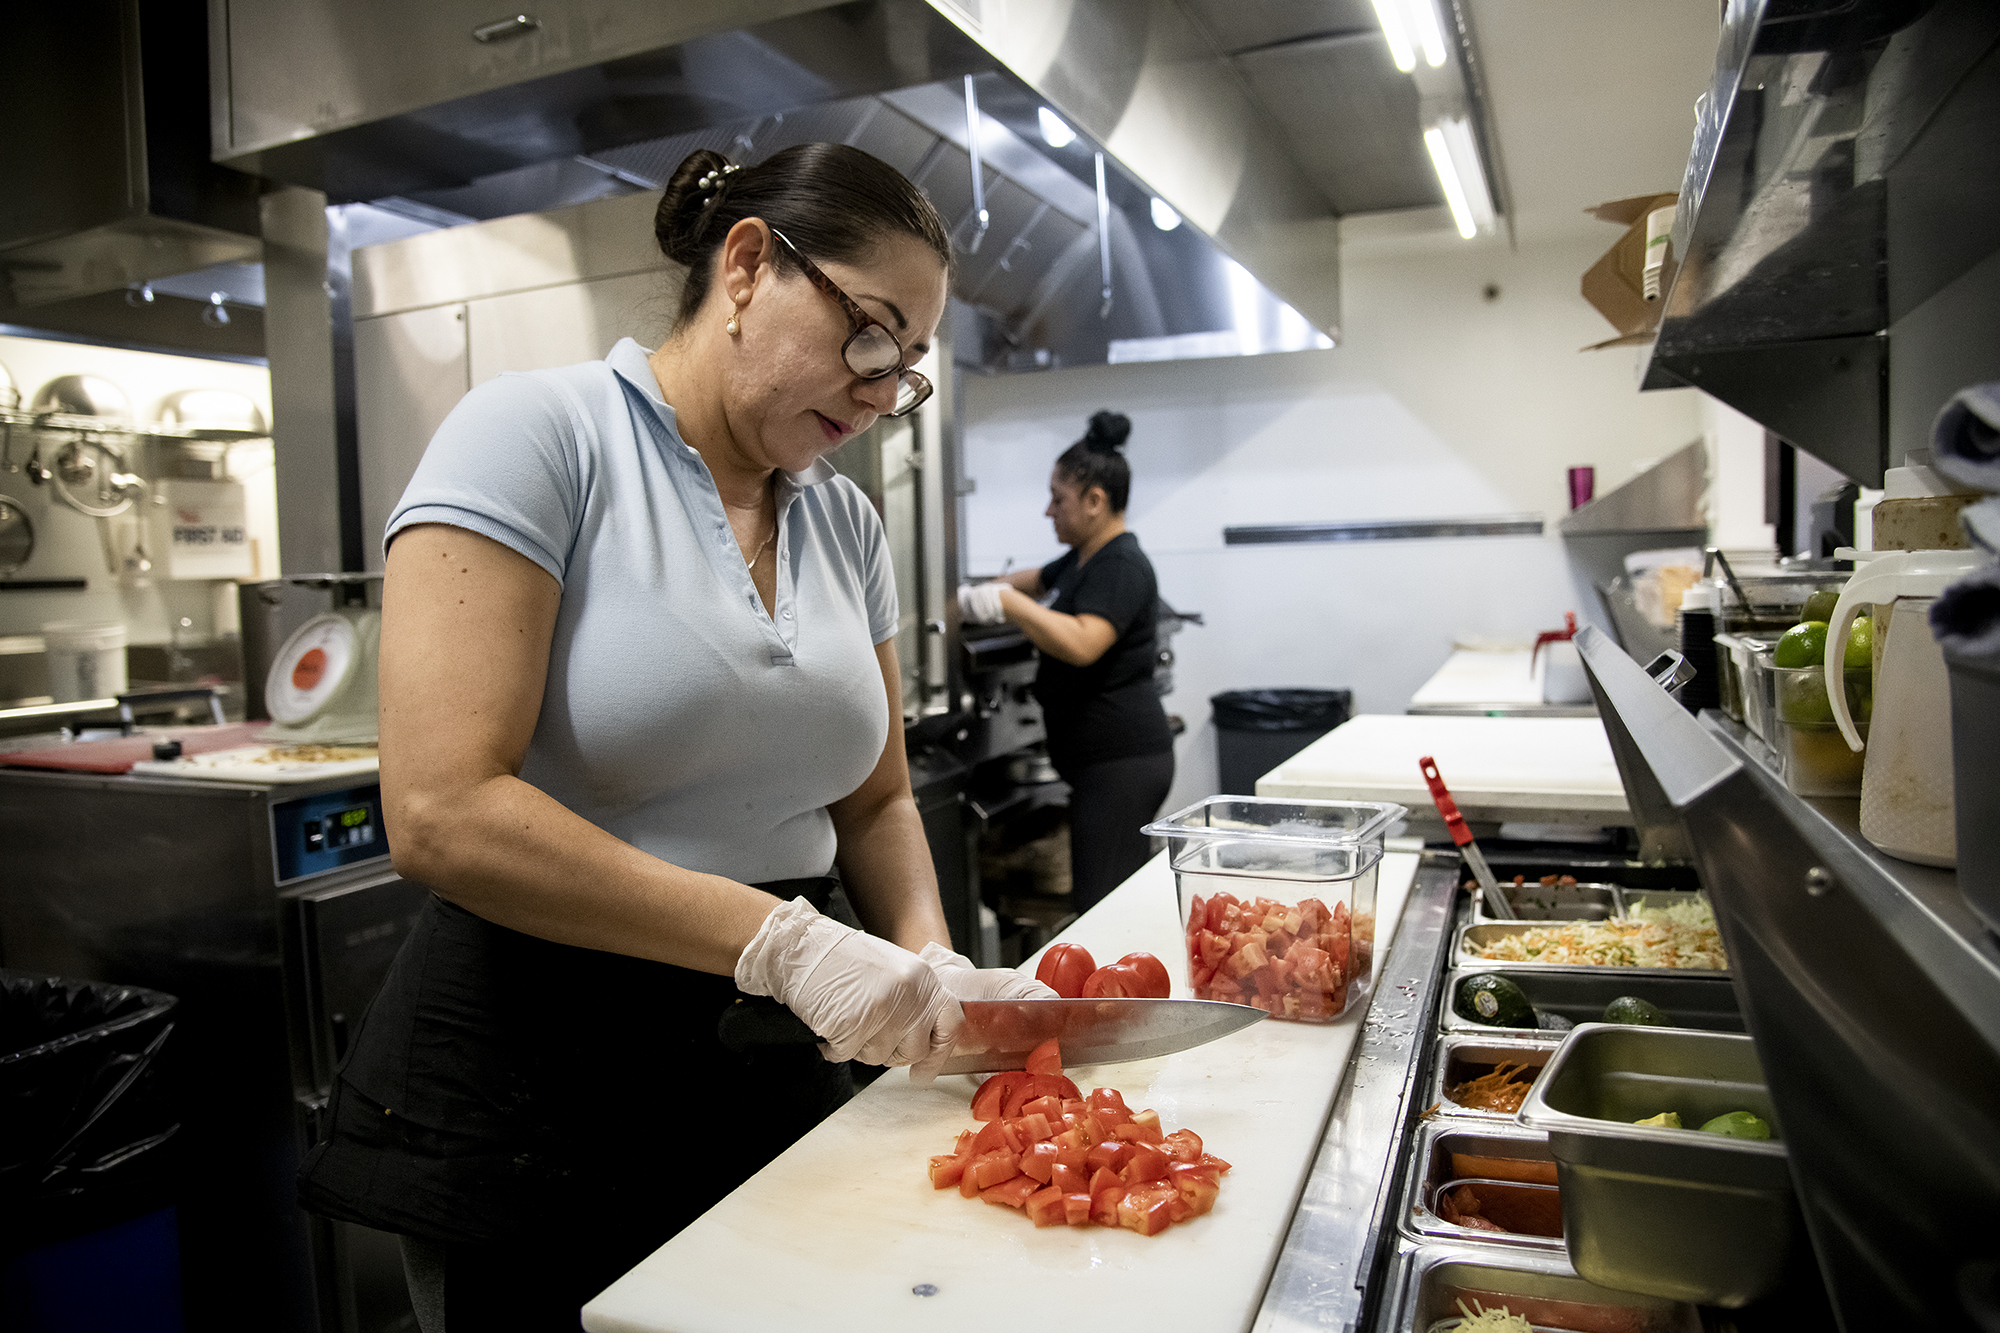 A woman with her hair back and wearing gloves chops tomatoes in a restaurant kitchen.